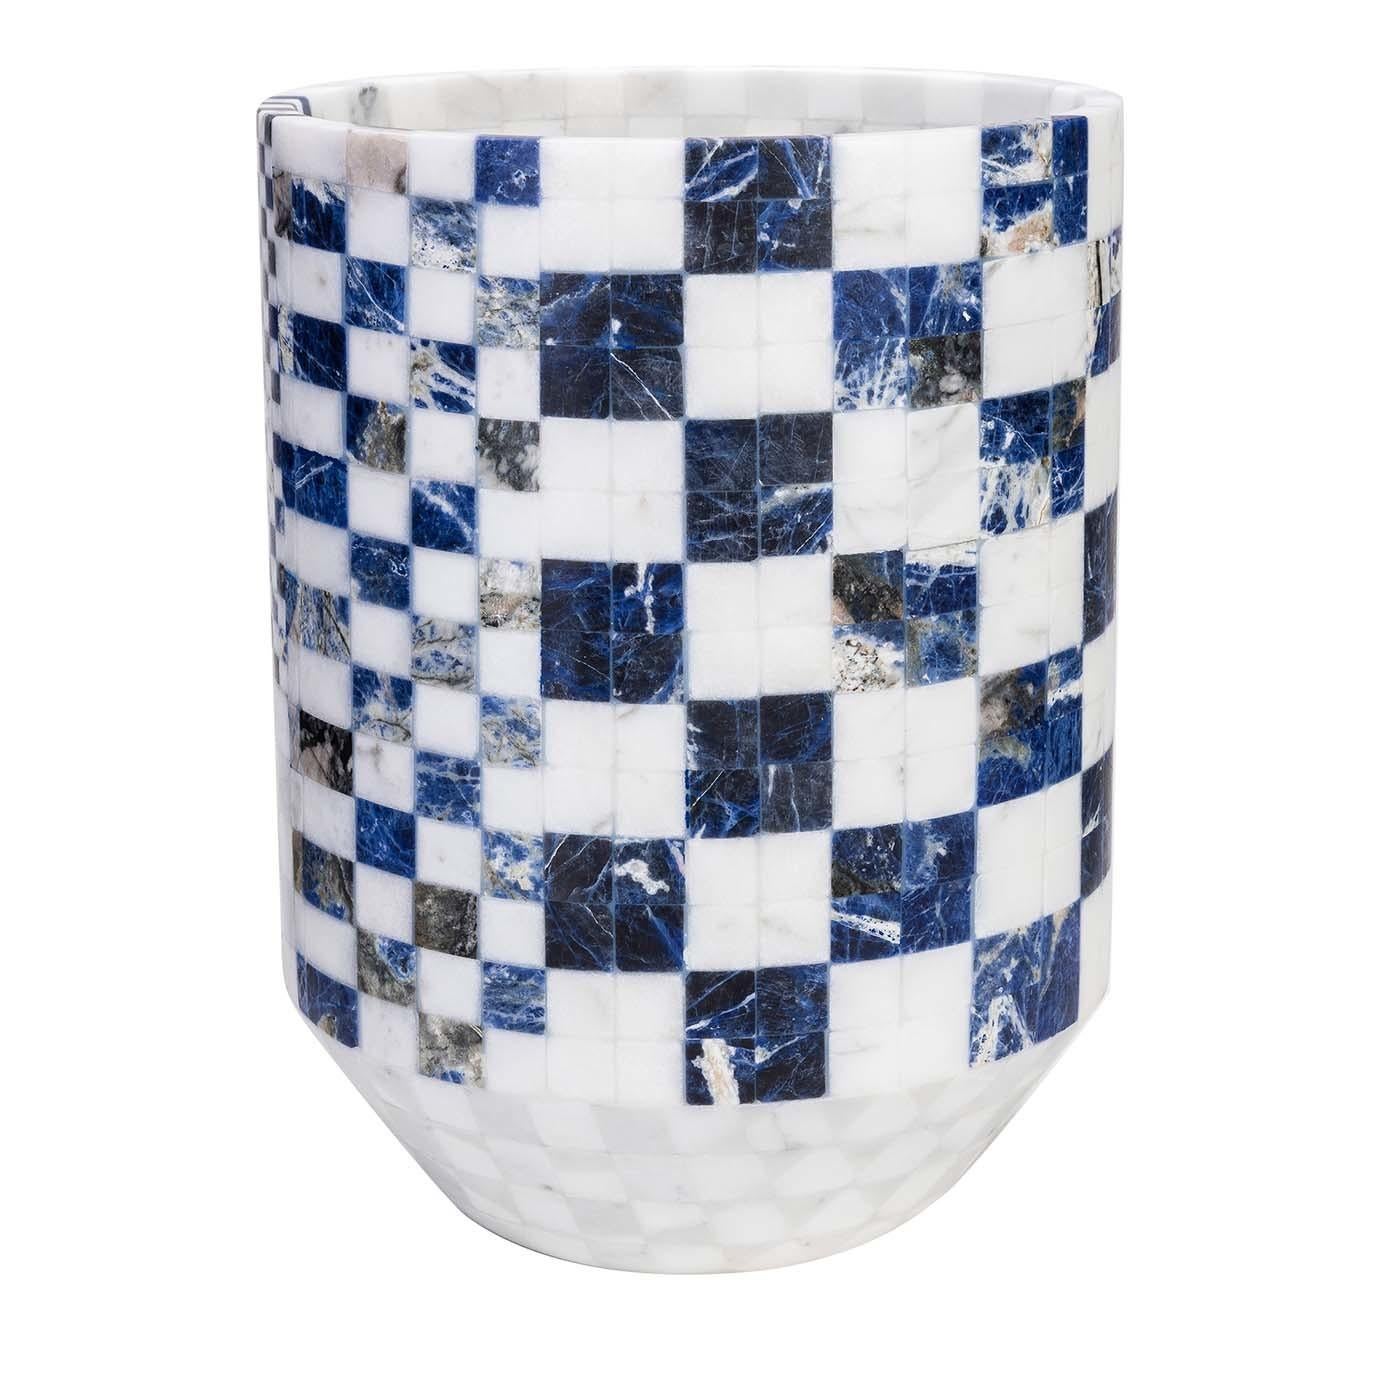 A kaleidoscopic design graces the surface of this vase of rare sophistication by Manuel Coltri and Paolo De Vivo executed by carefully cutting and composing sections of white Carrara and white Sivec marbles with blue sodalite. The checkerboard